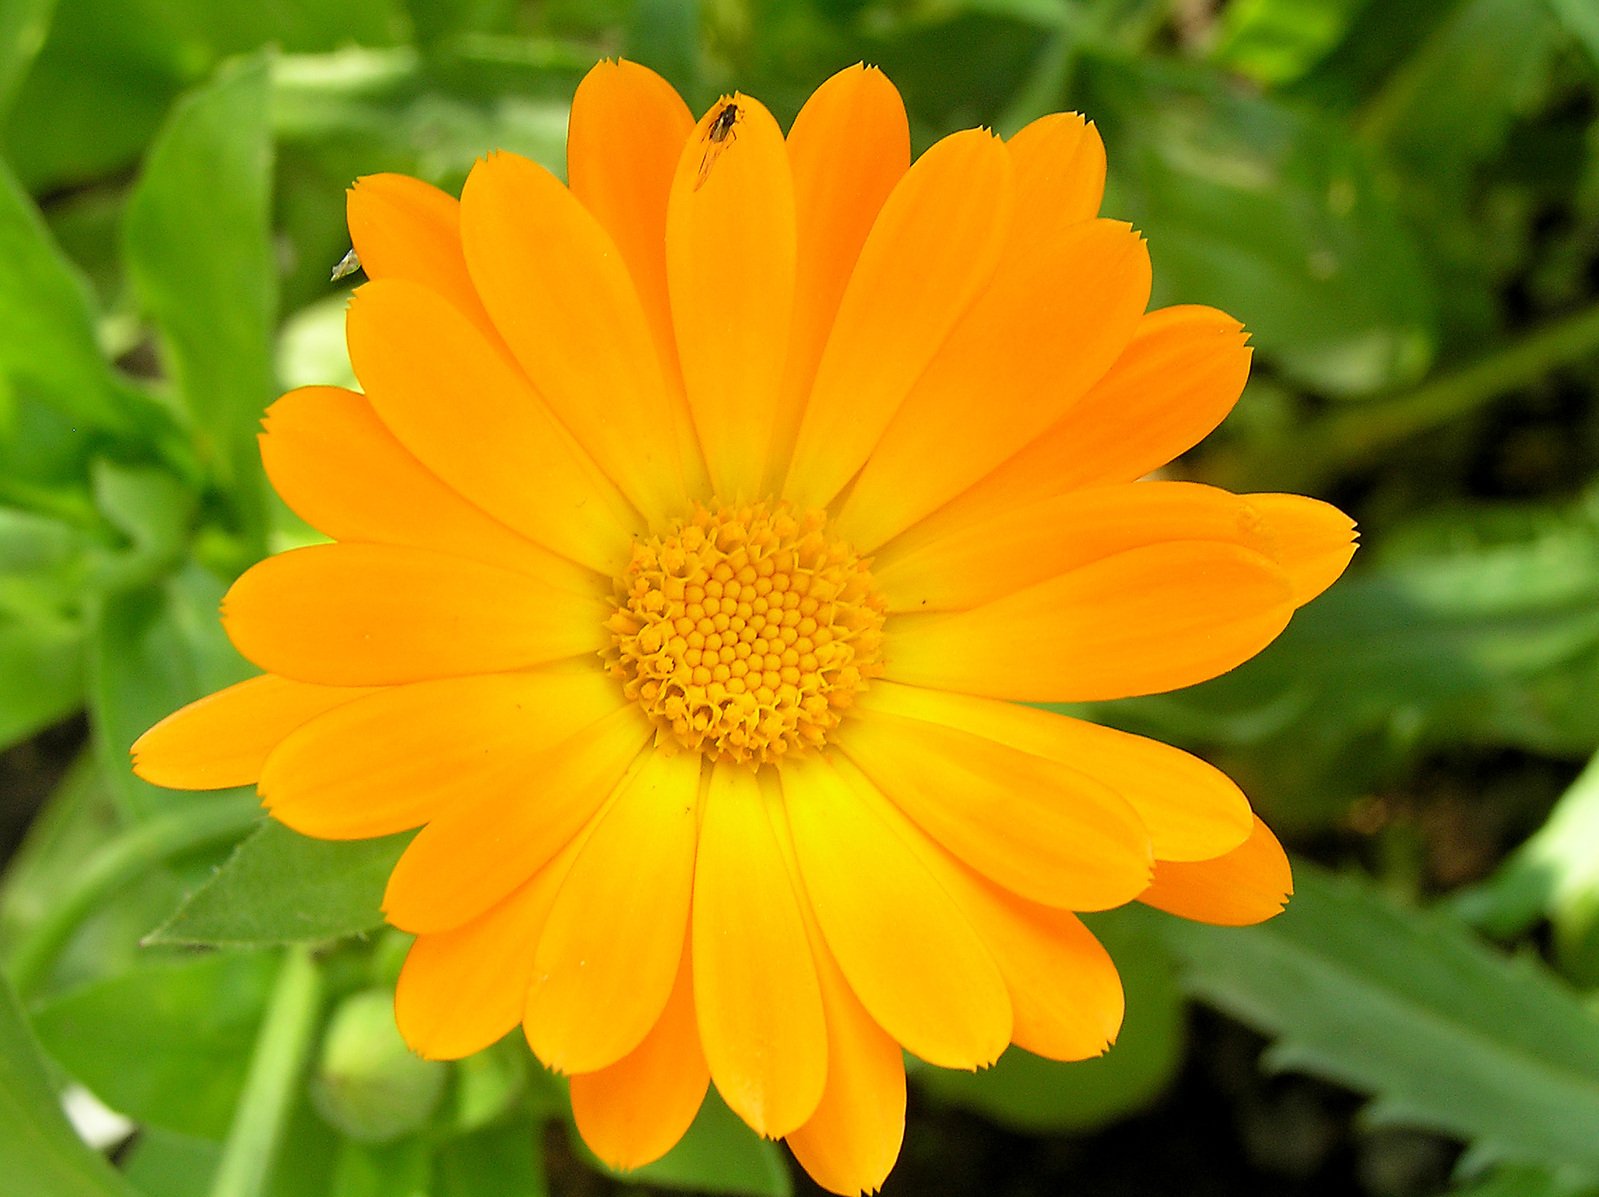 a yellow flower sitting in the middle of some green leaves